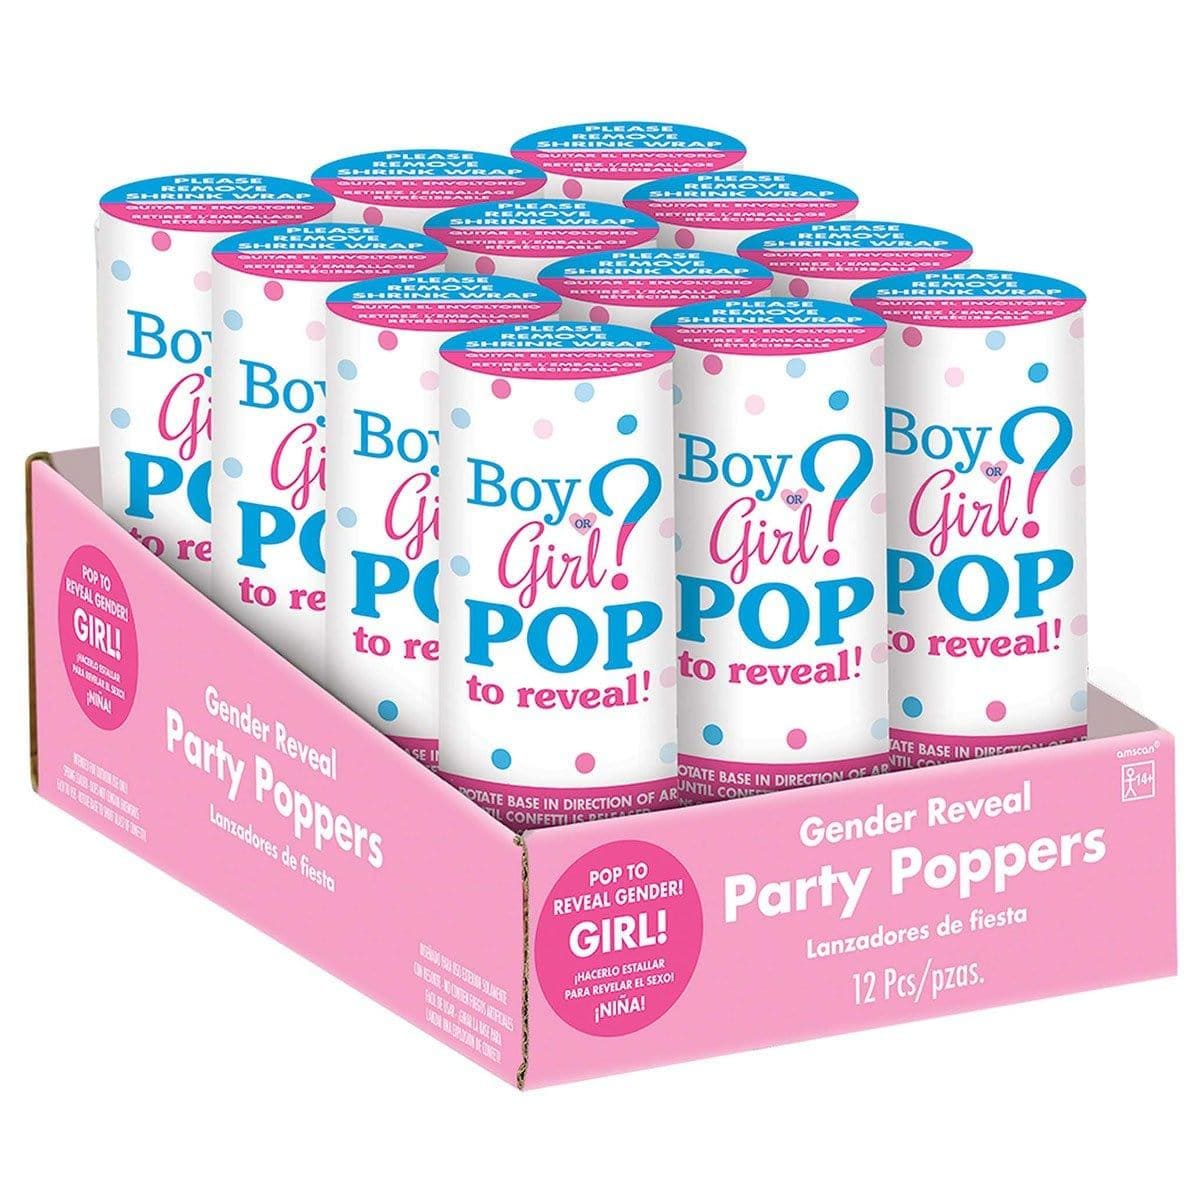 Buy Baby Shower Gender reveal pink confetti poppers, 12 per package sold at Party Expert